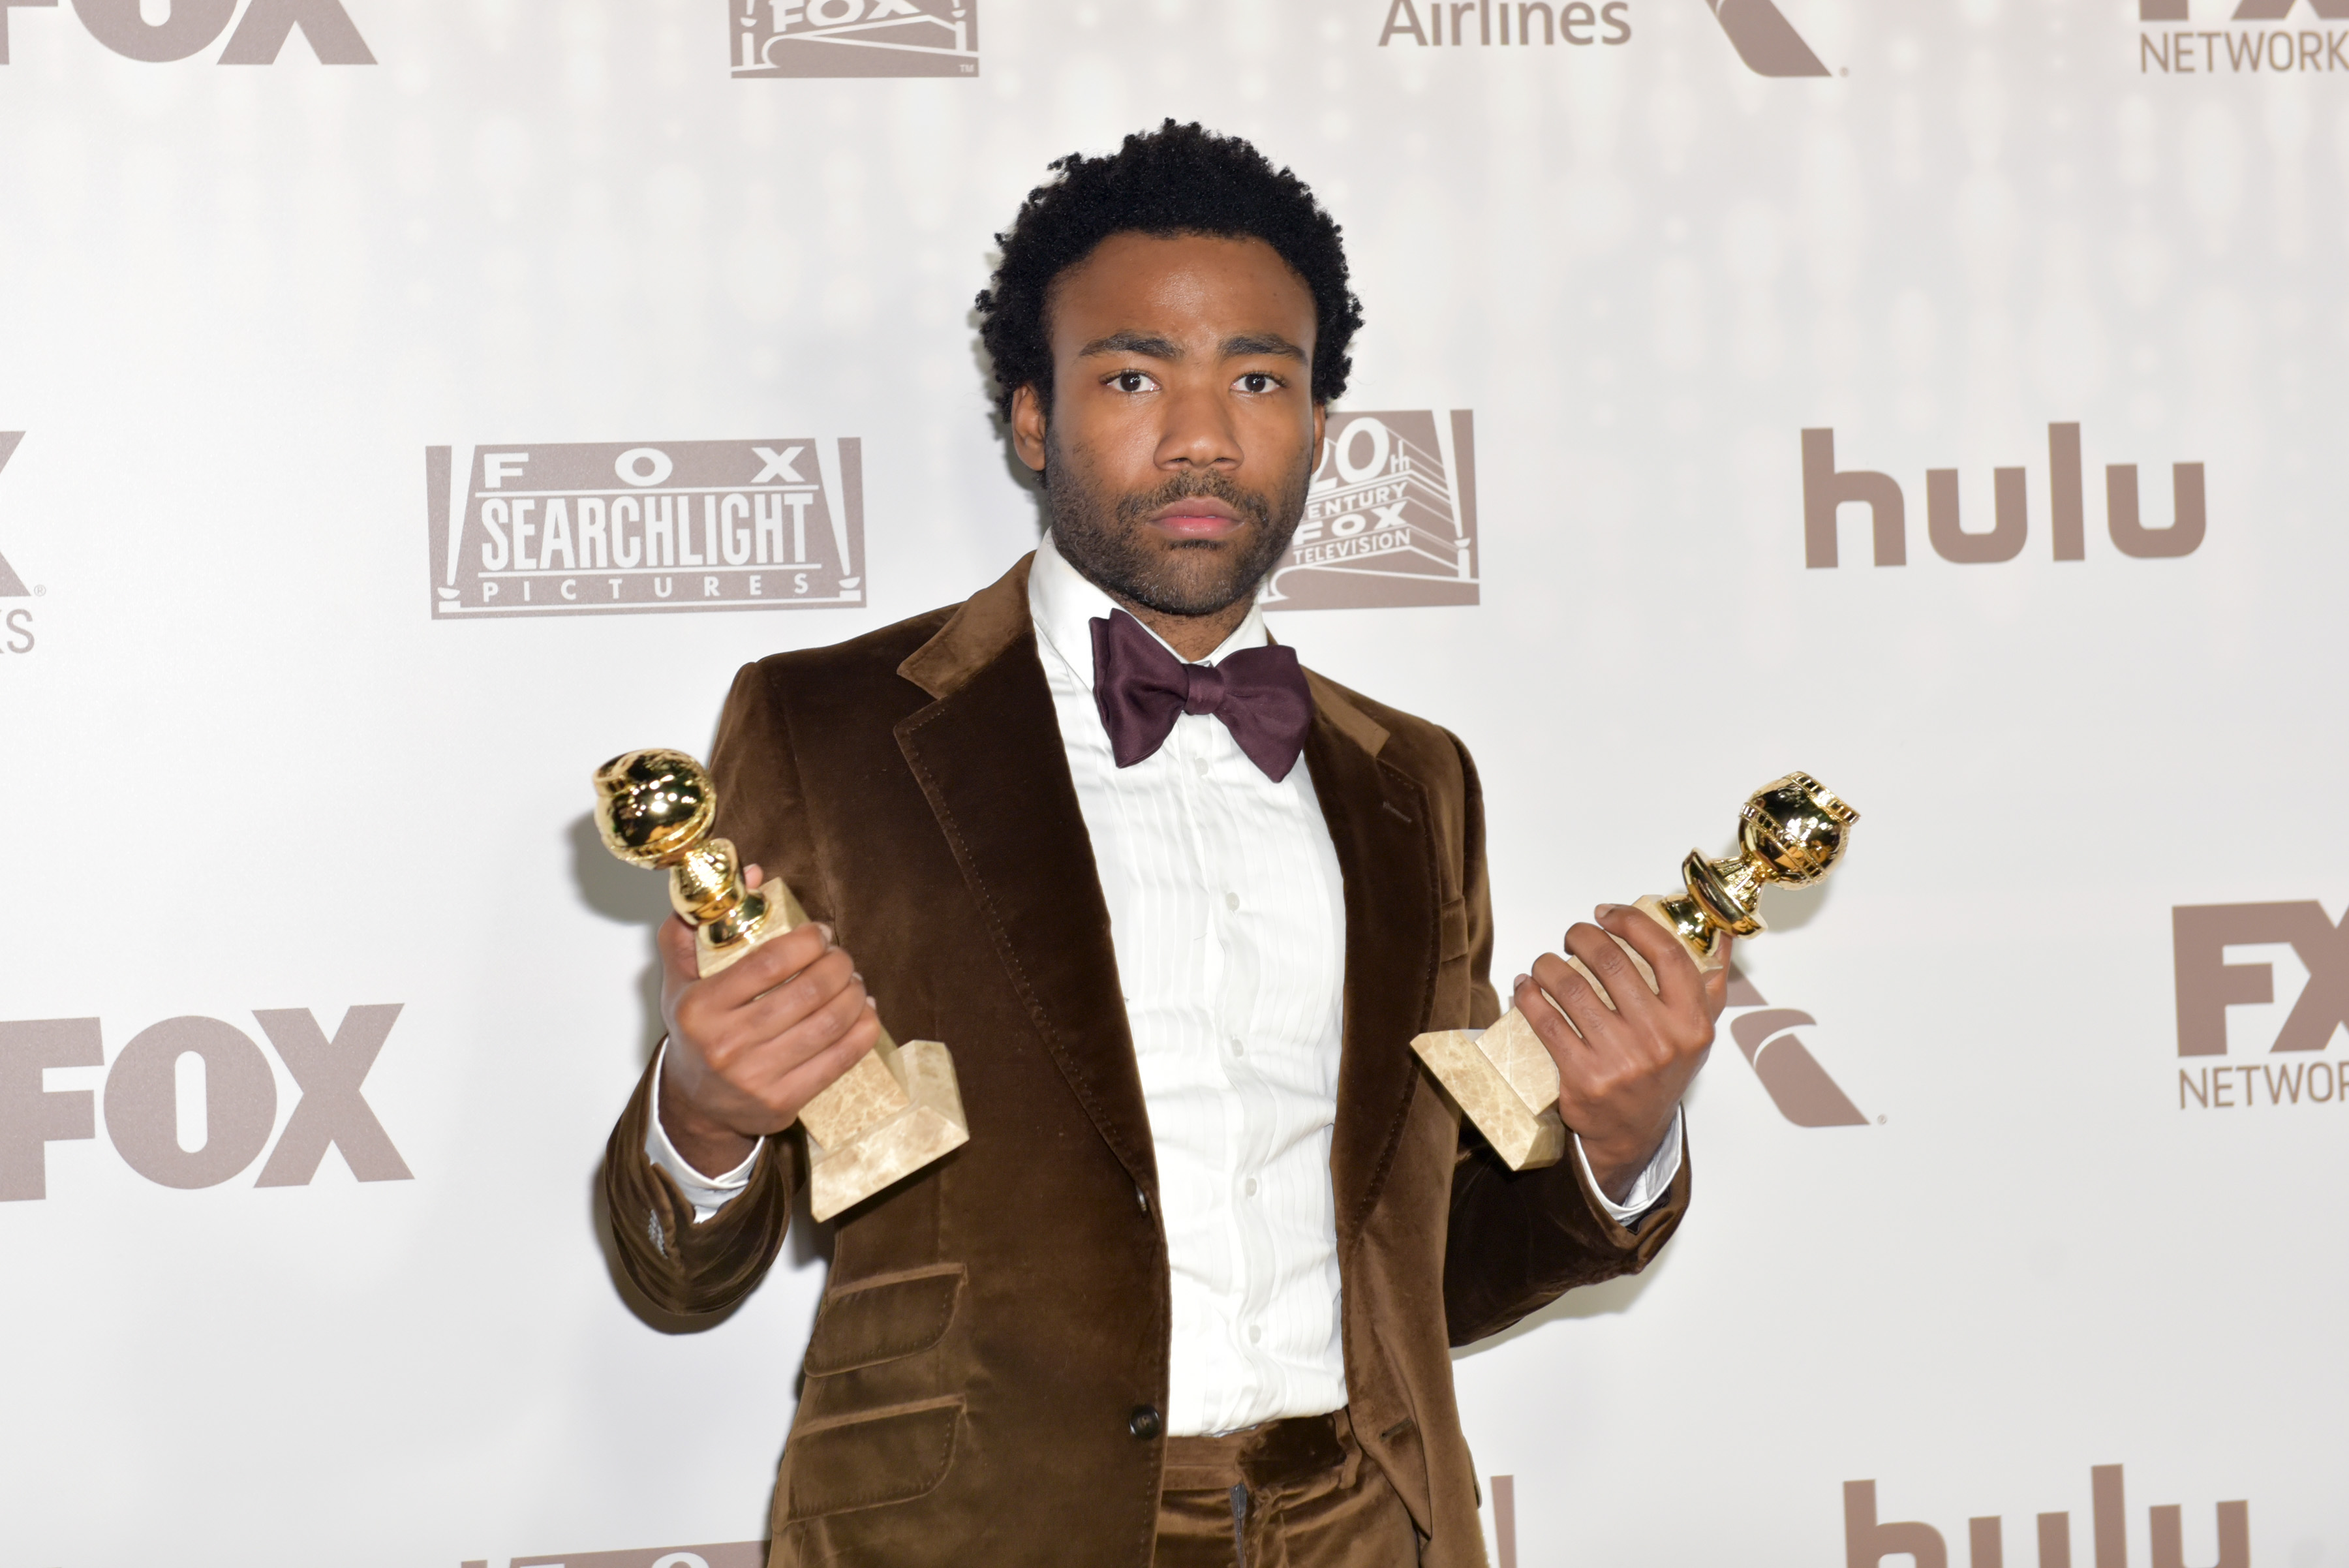 Donald Glover at the Golden Globe Awards after party on January 8, 2017 in Beverly Hills, California. (Photo by Rodin Eckenroth/Getty Images)